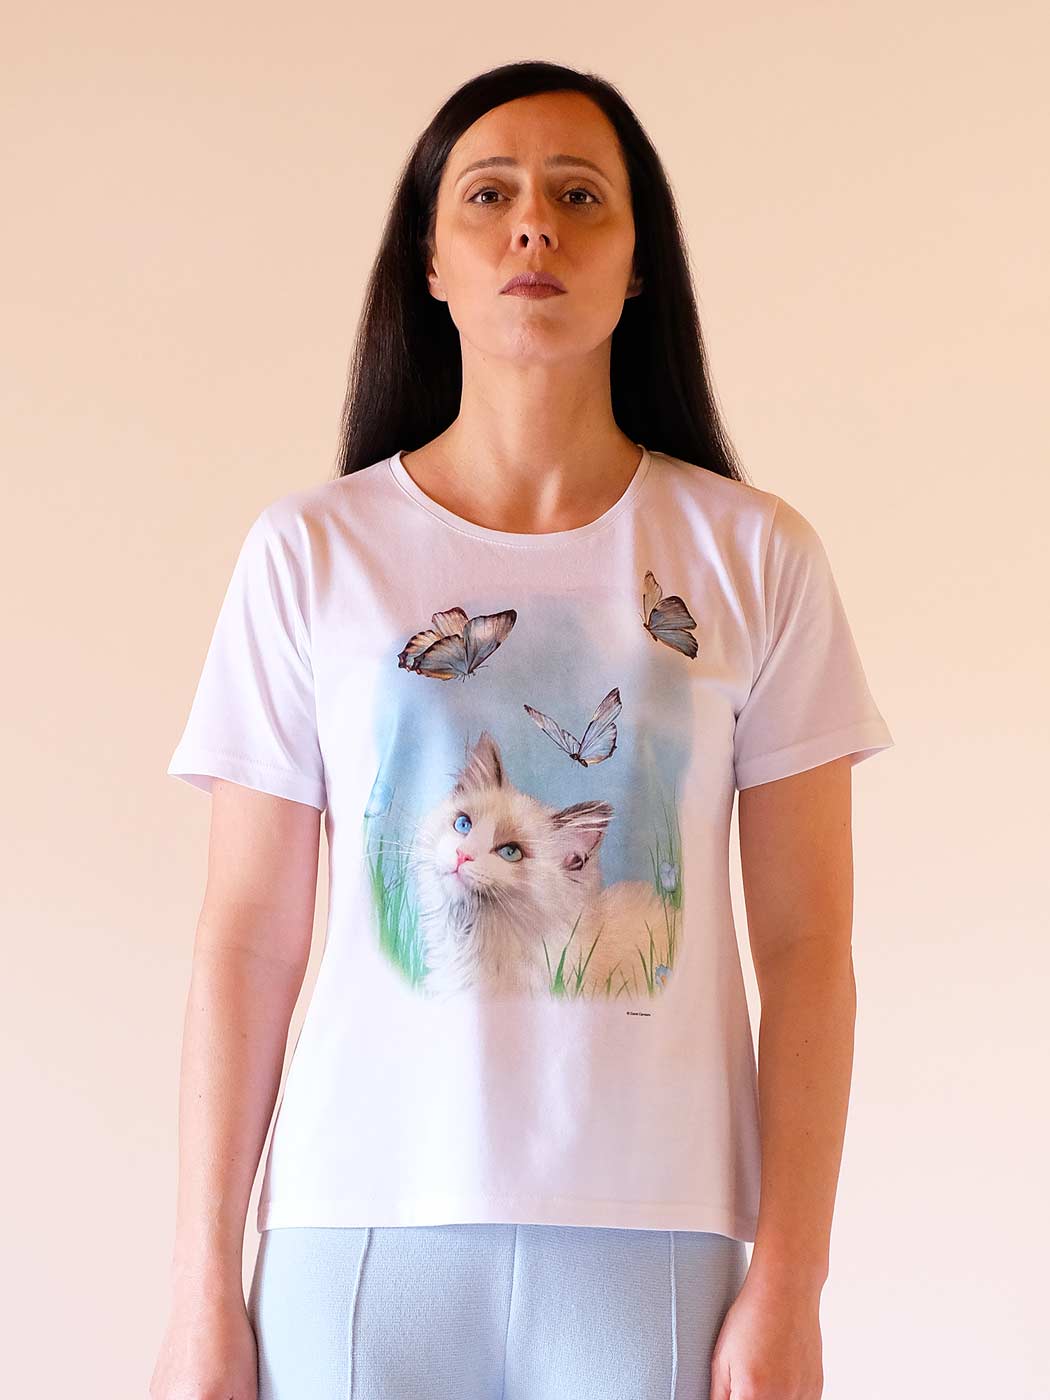 Rag Doll Cat T-shirt with Butterflies in 100% Cotton